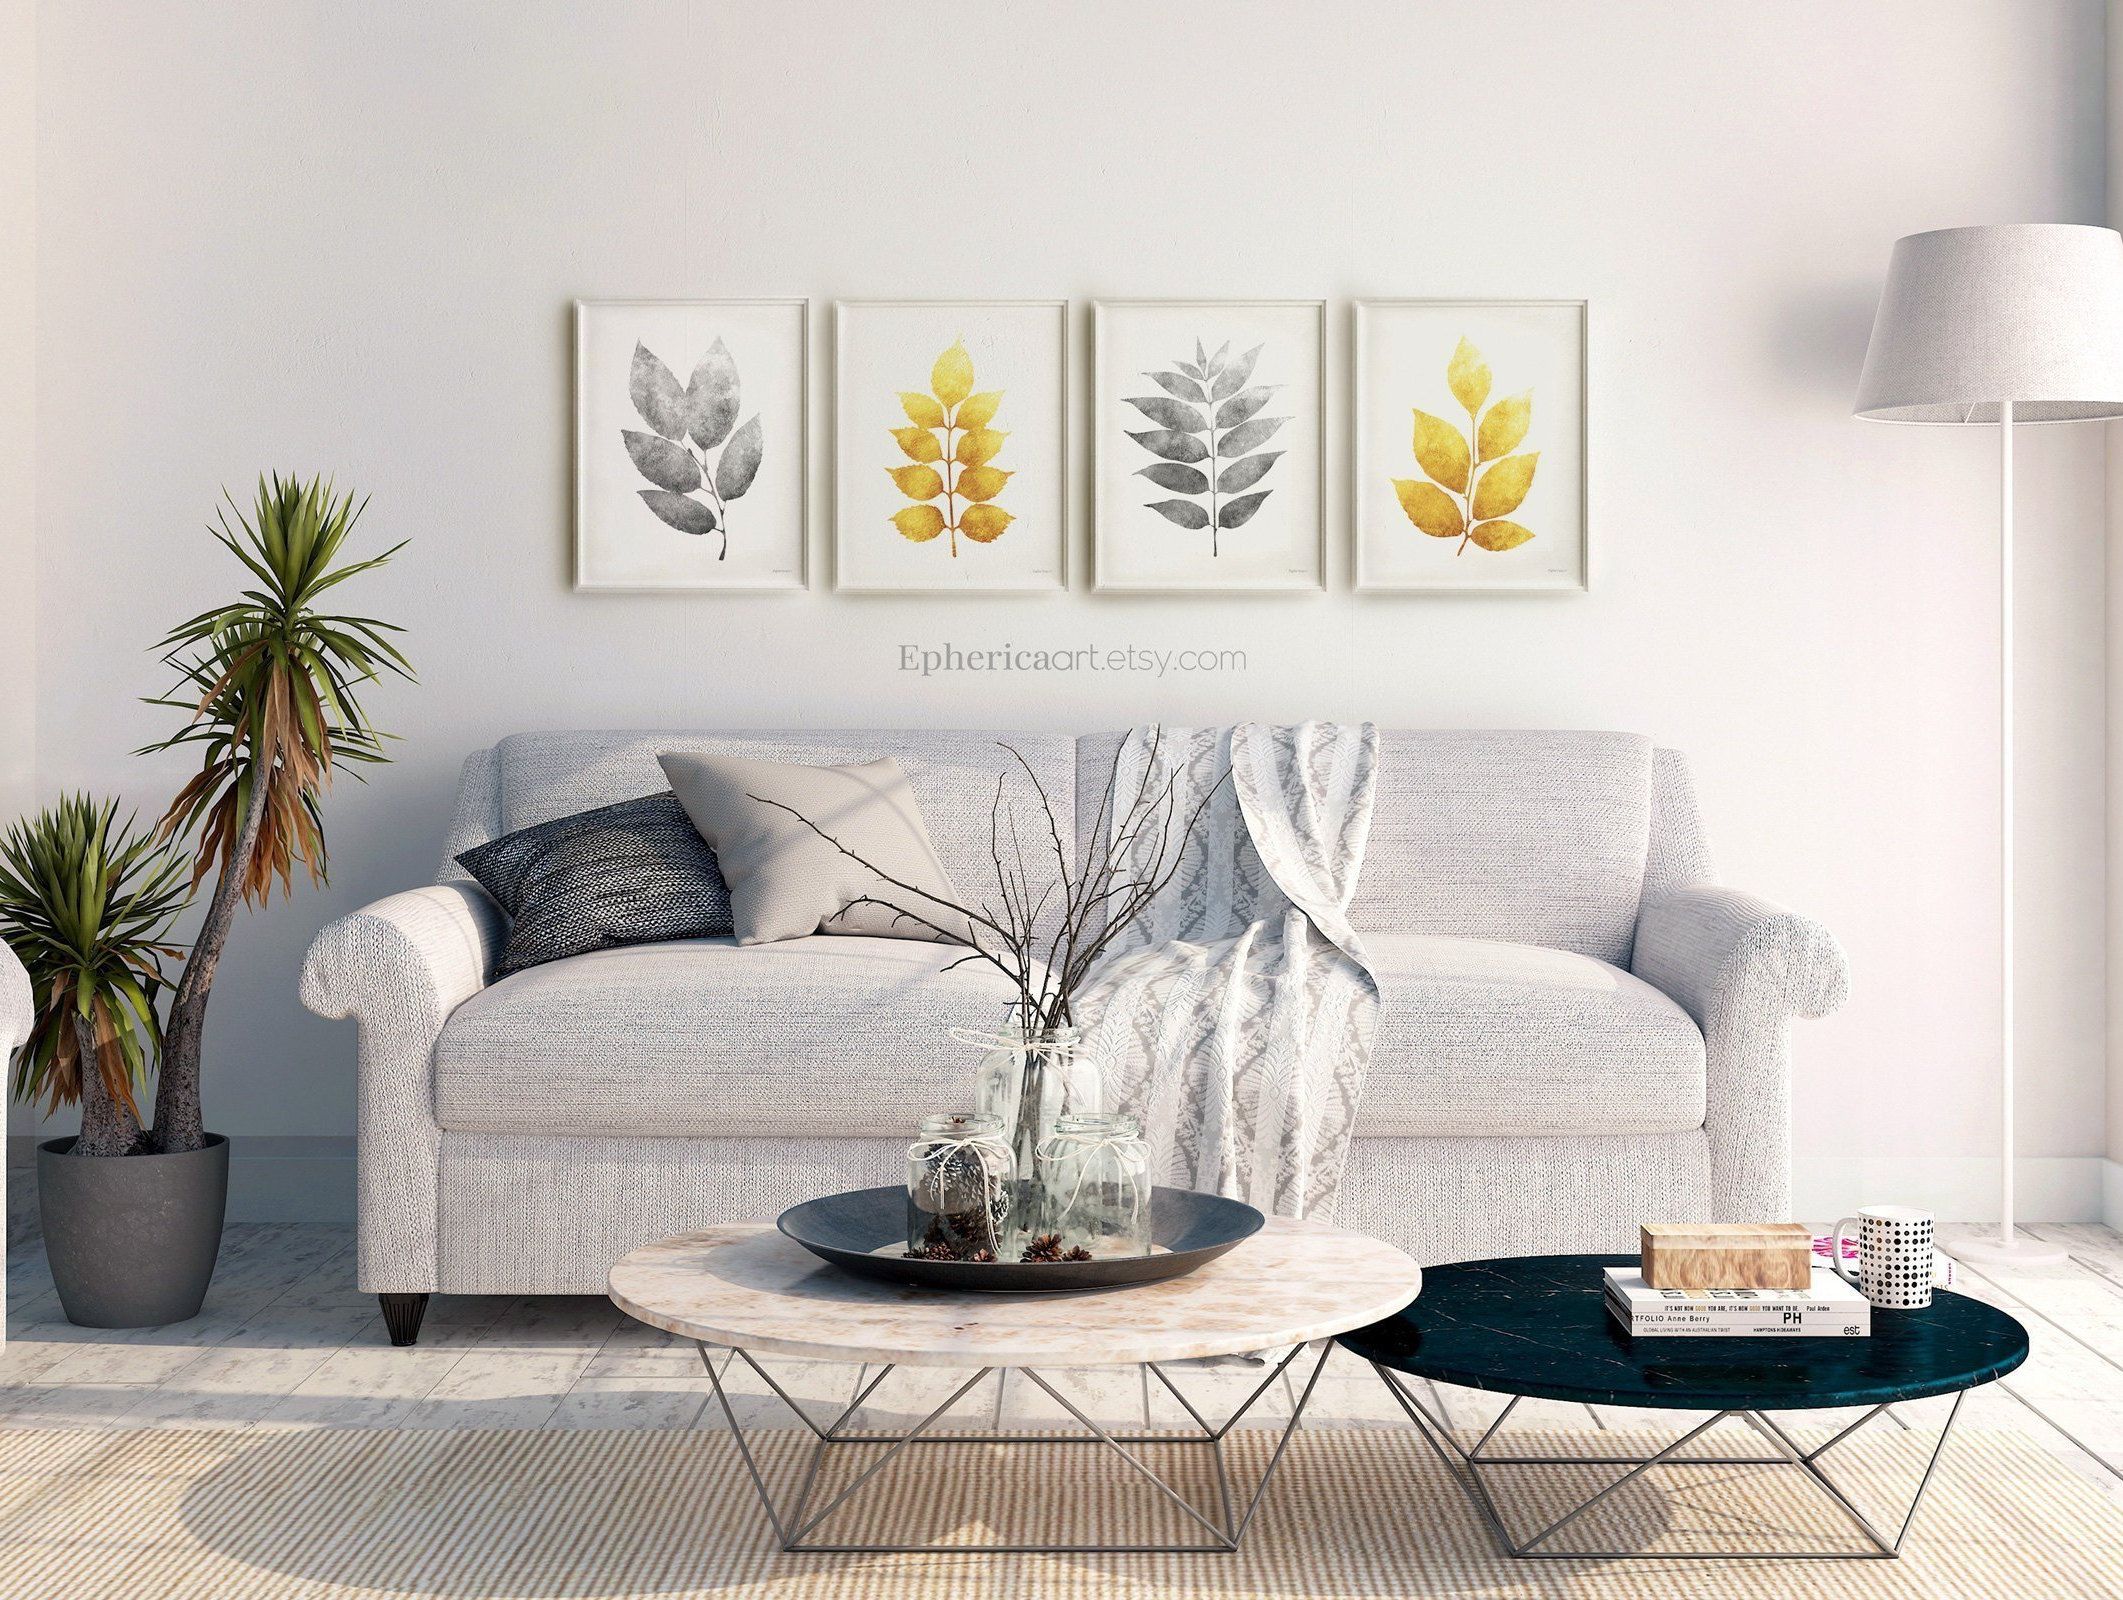 Wall Decor Set Of Prints, Gray And Yellow Wall Art Set Of 4 Leaves Prints,  16x20 Printable Home Decor Living Room Decor, 4 Piece Wall Decor Within 4 Piece Wall Decor Sets (Photo 25 of 30)